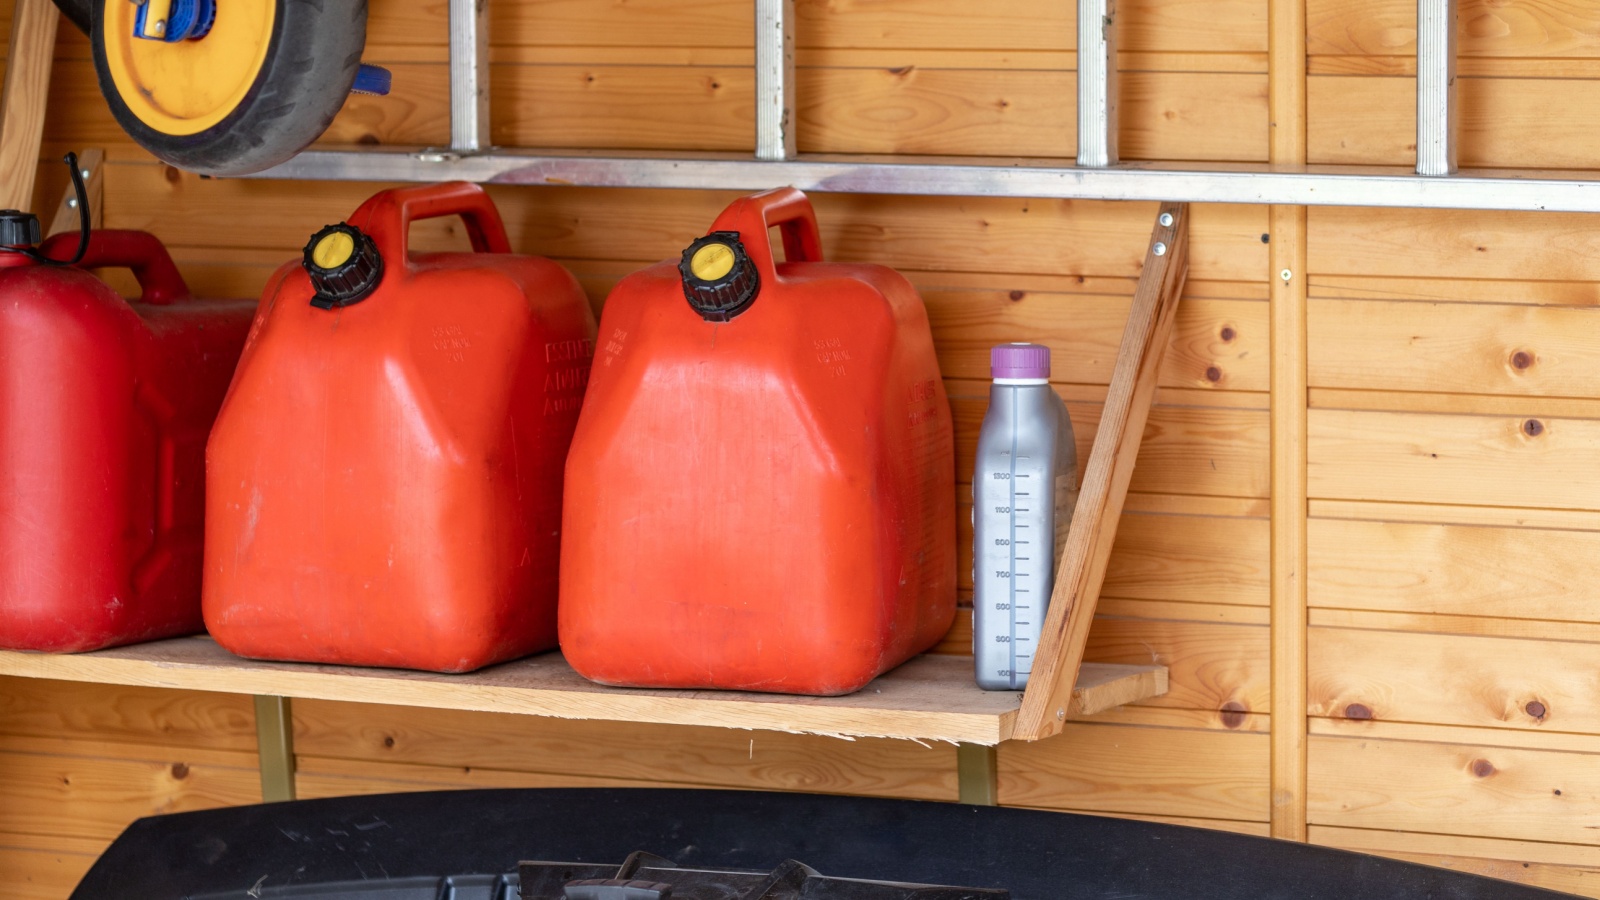 Fuel storage at home